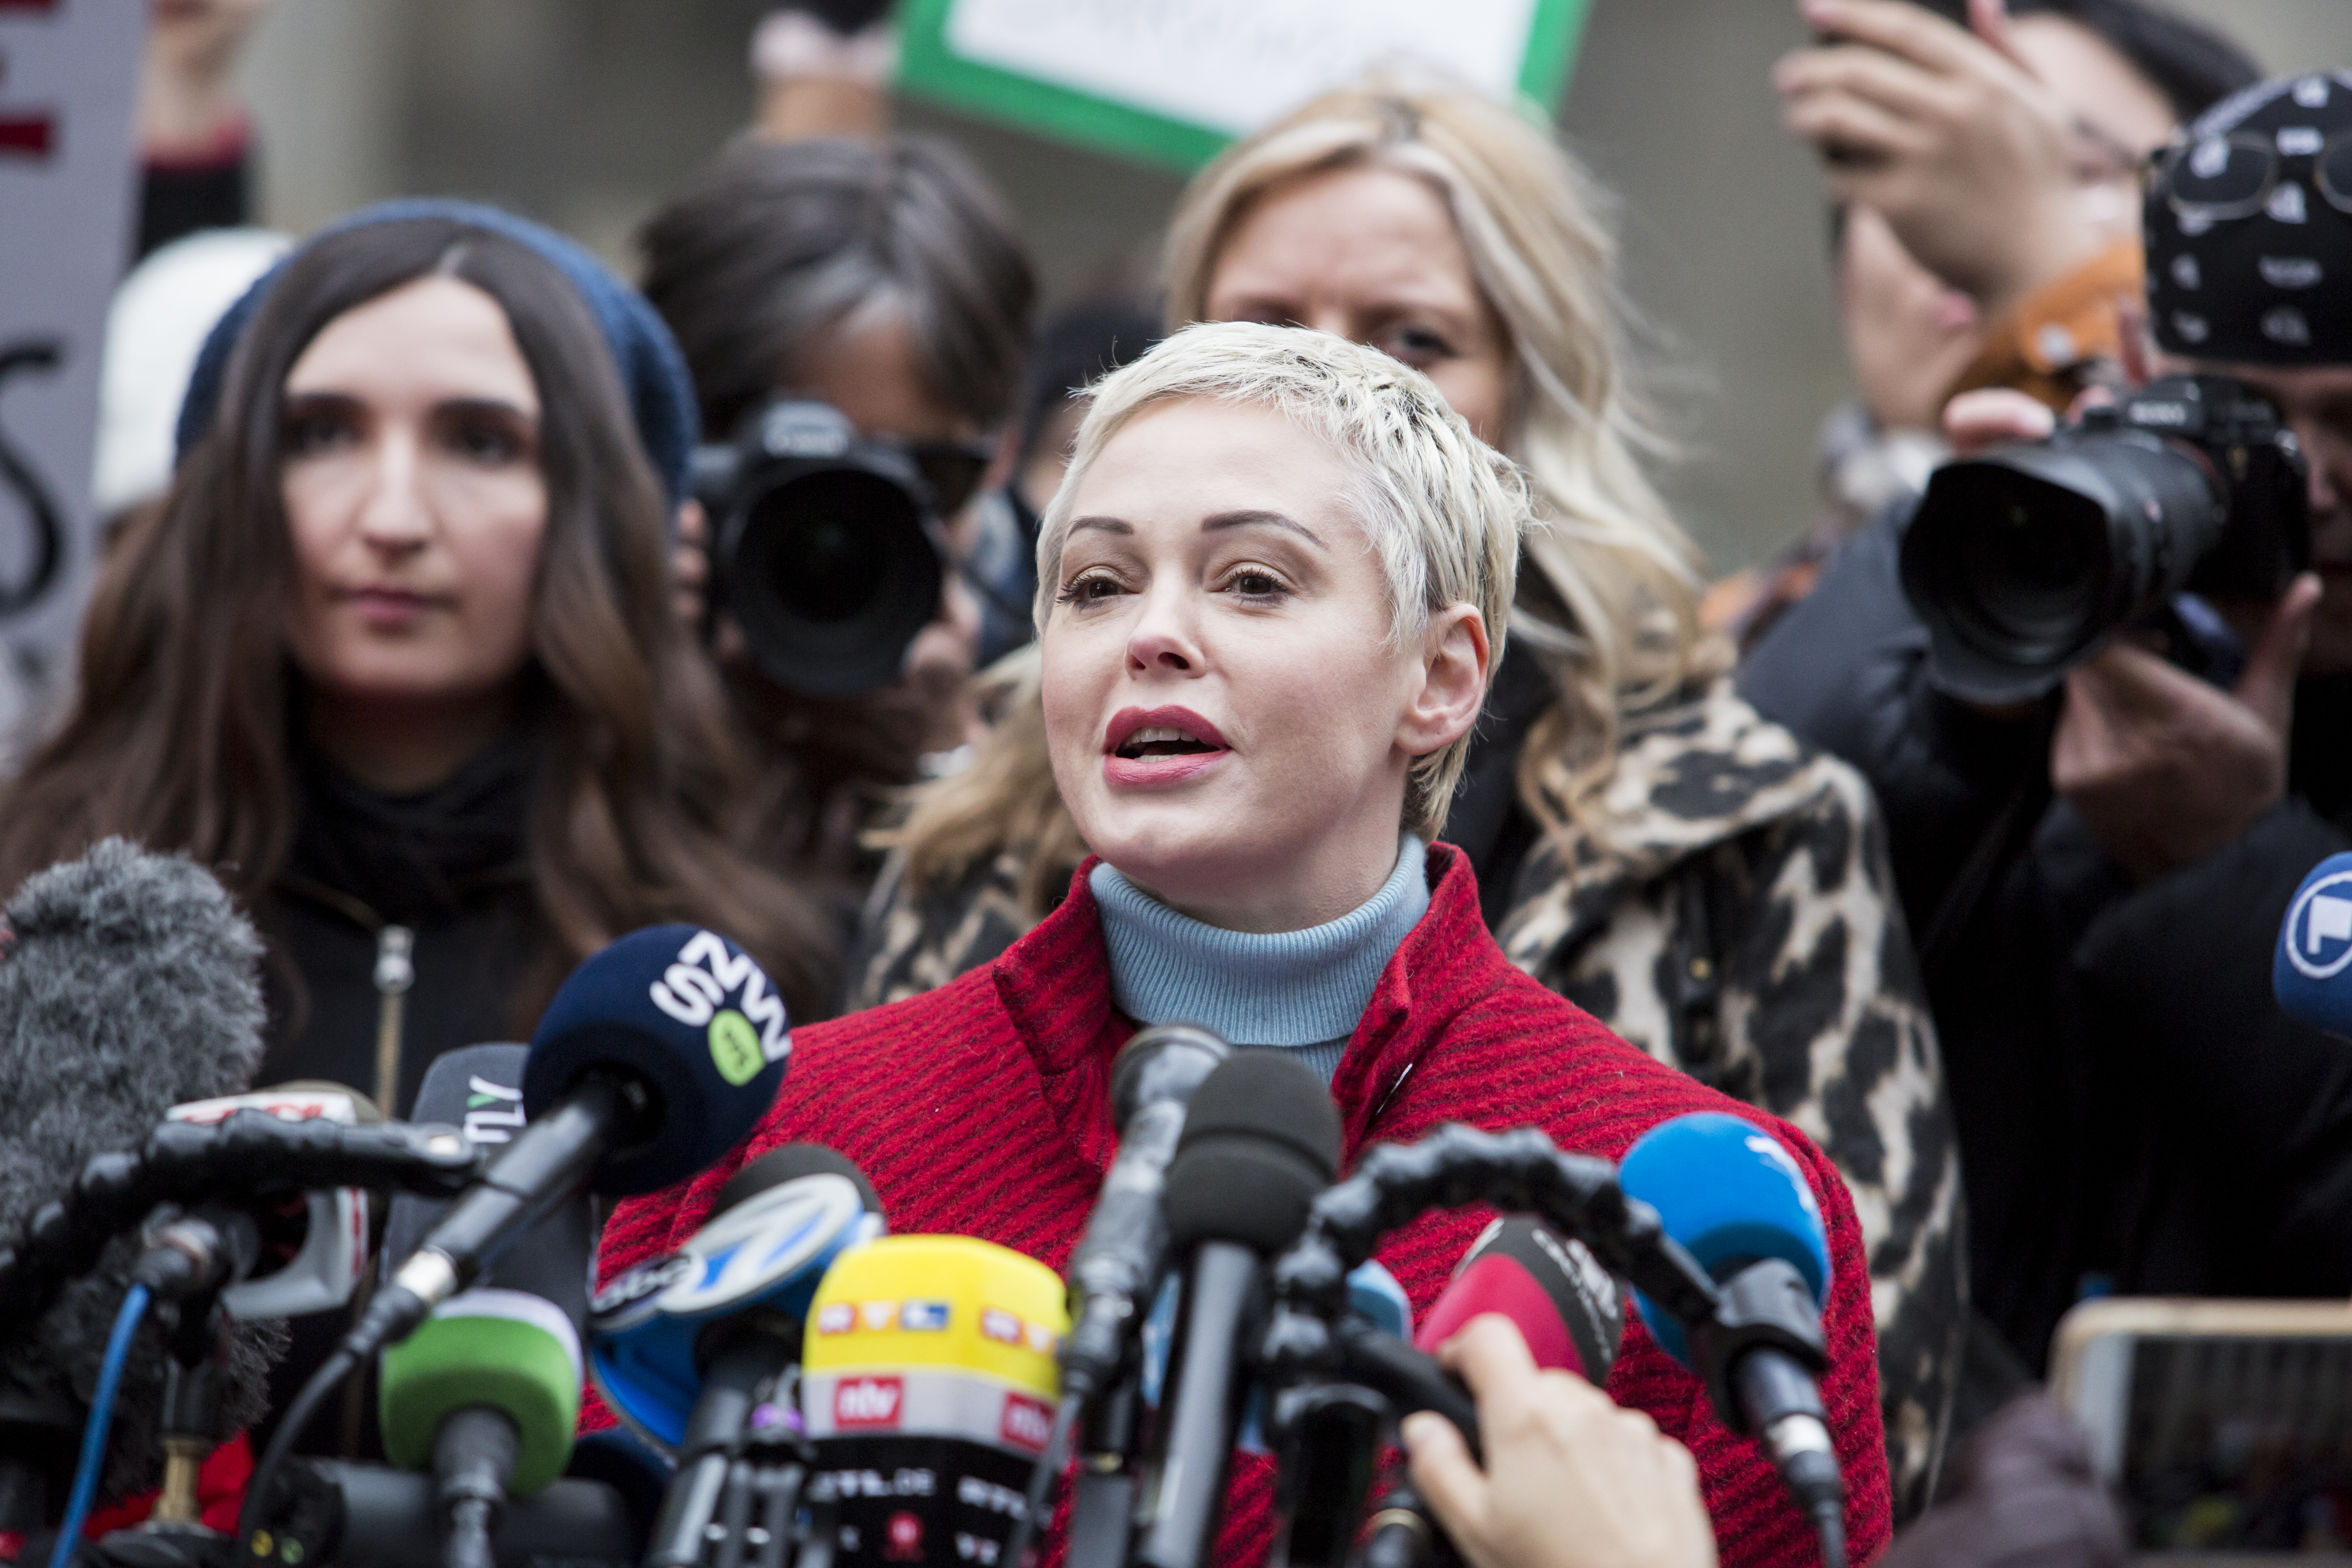 Actress Rose McGowan, who accused Weinstein of raping her and destroying her career, joins other accusers and protesters and speaks speech to the press as Harvey Weinstein arrived at the Manhattan courthouse on January 6, 2020 in New York City.(Photo by Pablo Monsalve/VIEWpress via Getty Images)